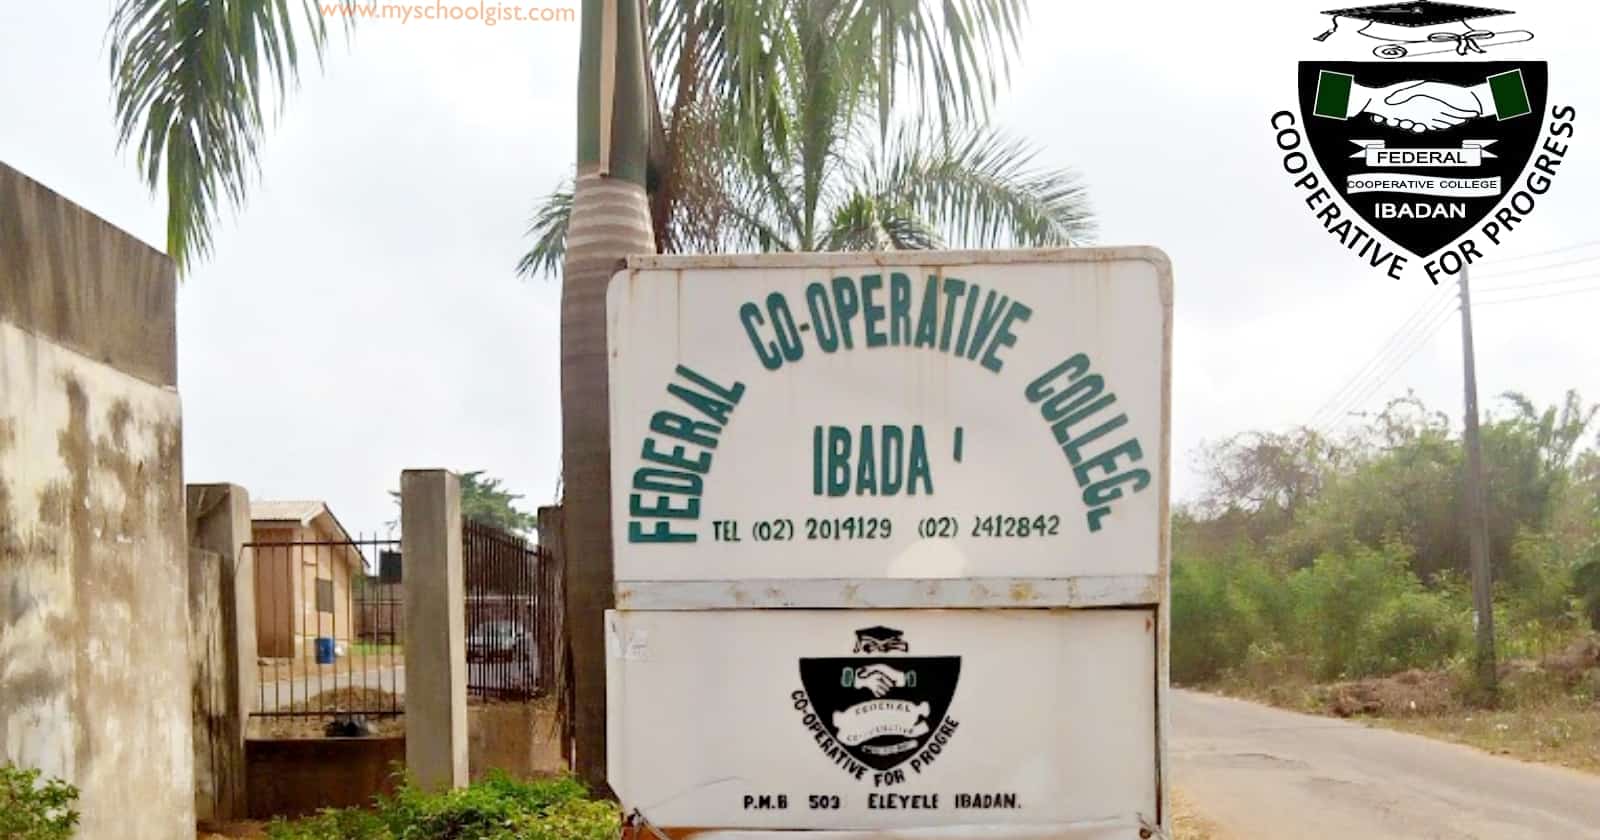 Federal Co-operative College Ibadan Diploma Admission Form